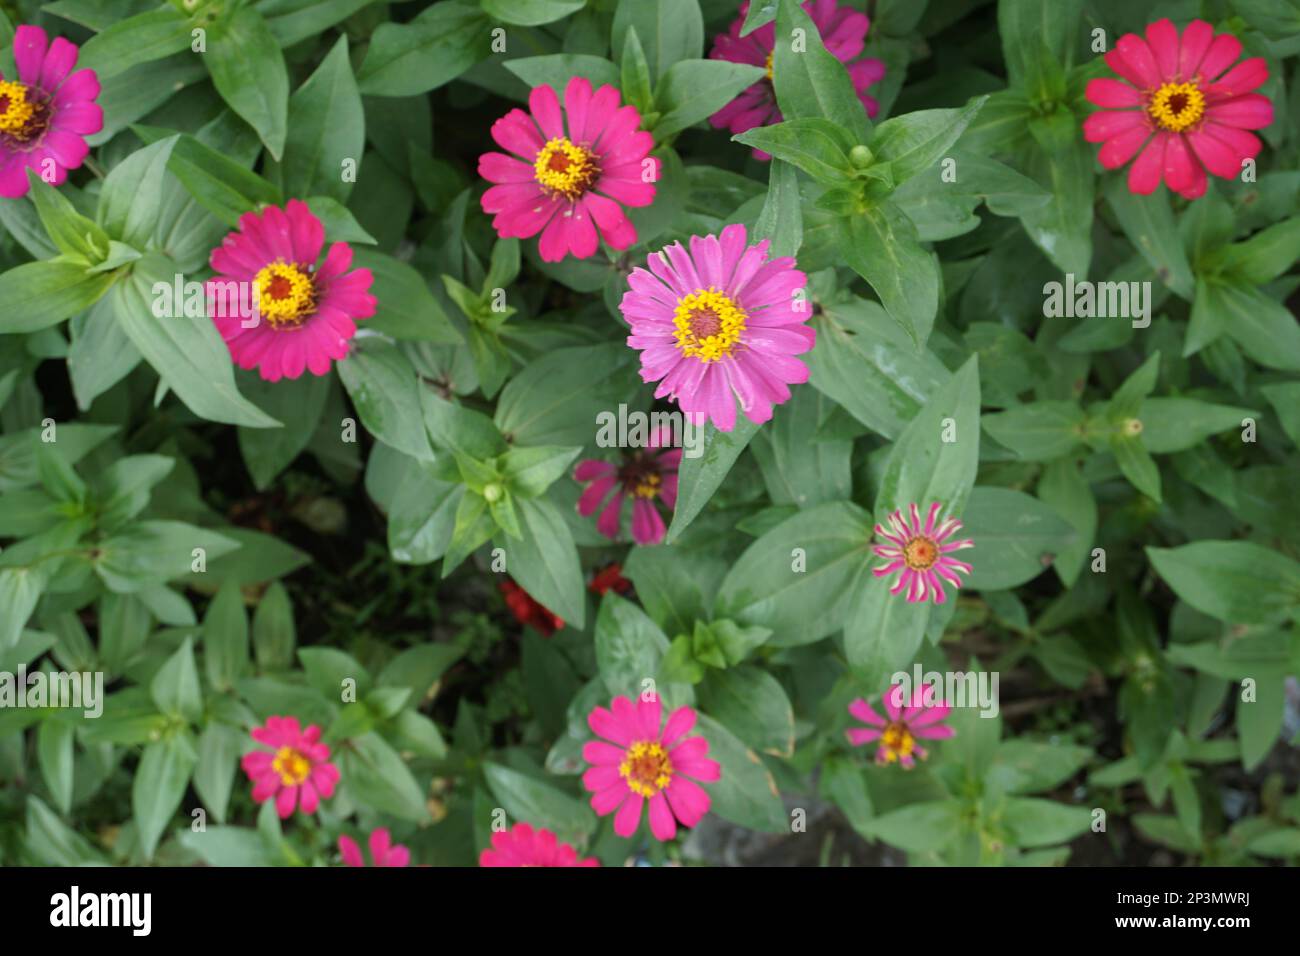 Erigeron karvinskianus, the Mexican fleabane, is a species of daisy like flowering plant in the family Asteraceae, native to Mexico and parts of Centr Stock Photo